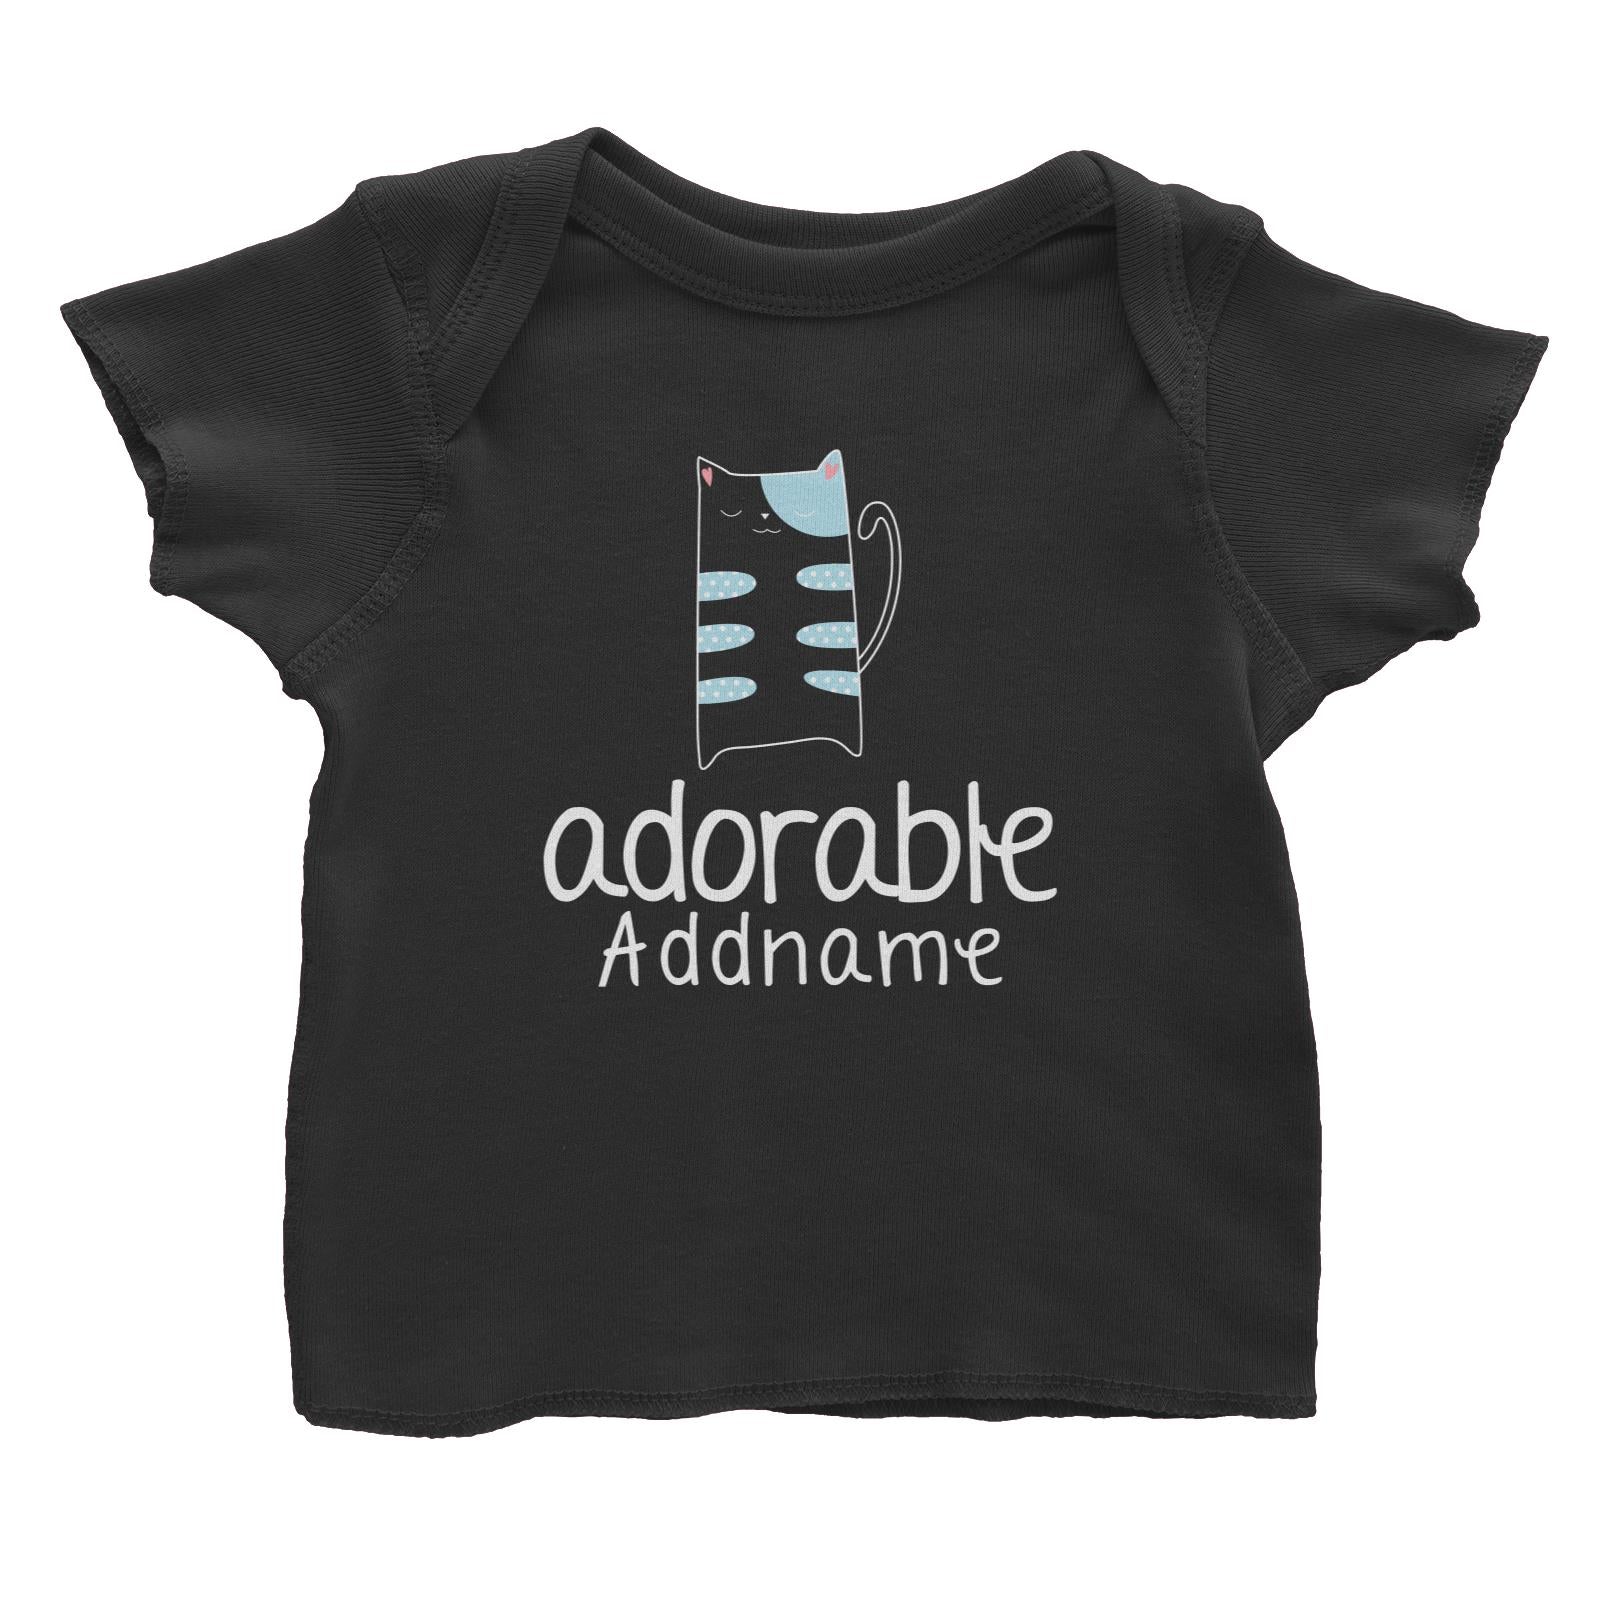 Cute Animals and Friends Series 2 Cat Adorable Addname Baby T-Shirt